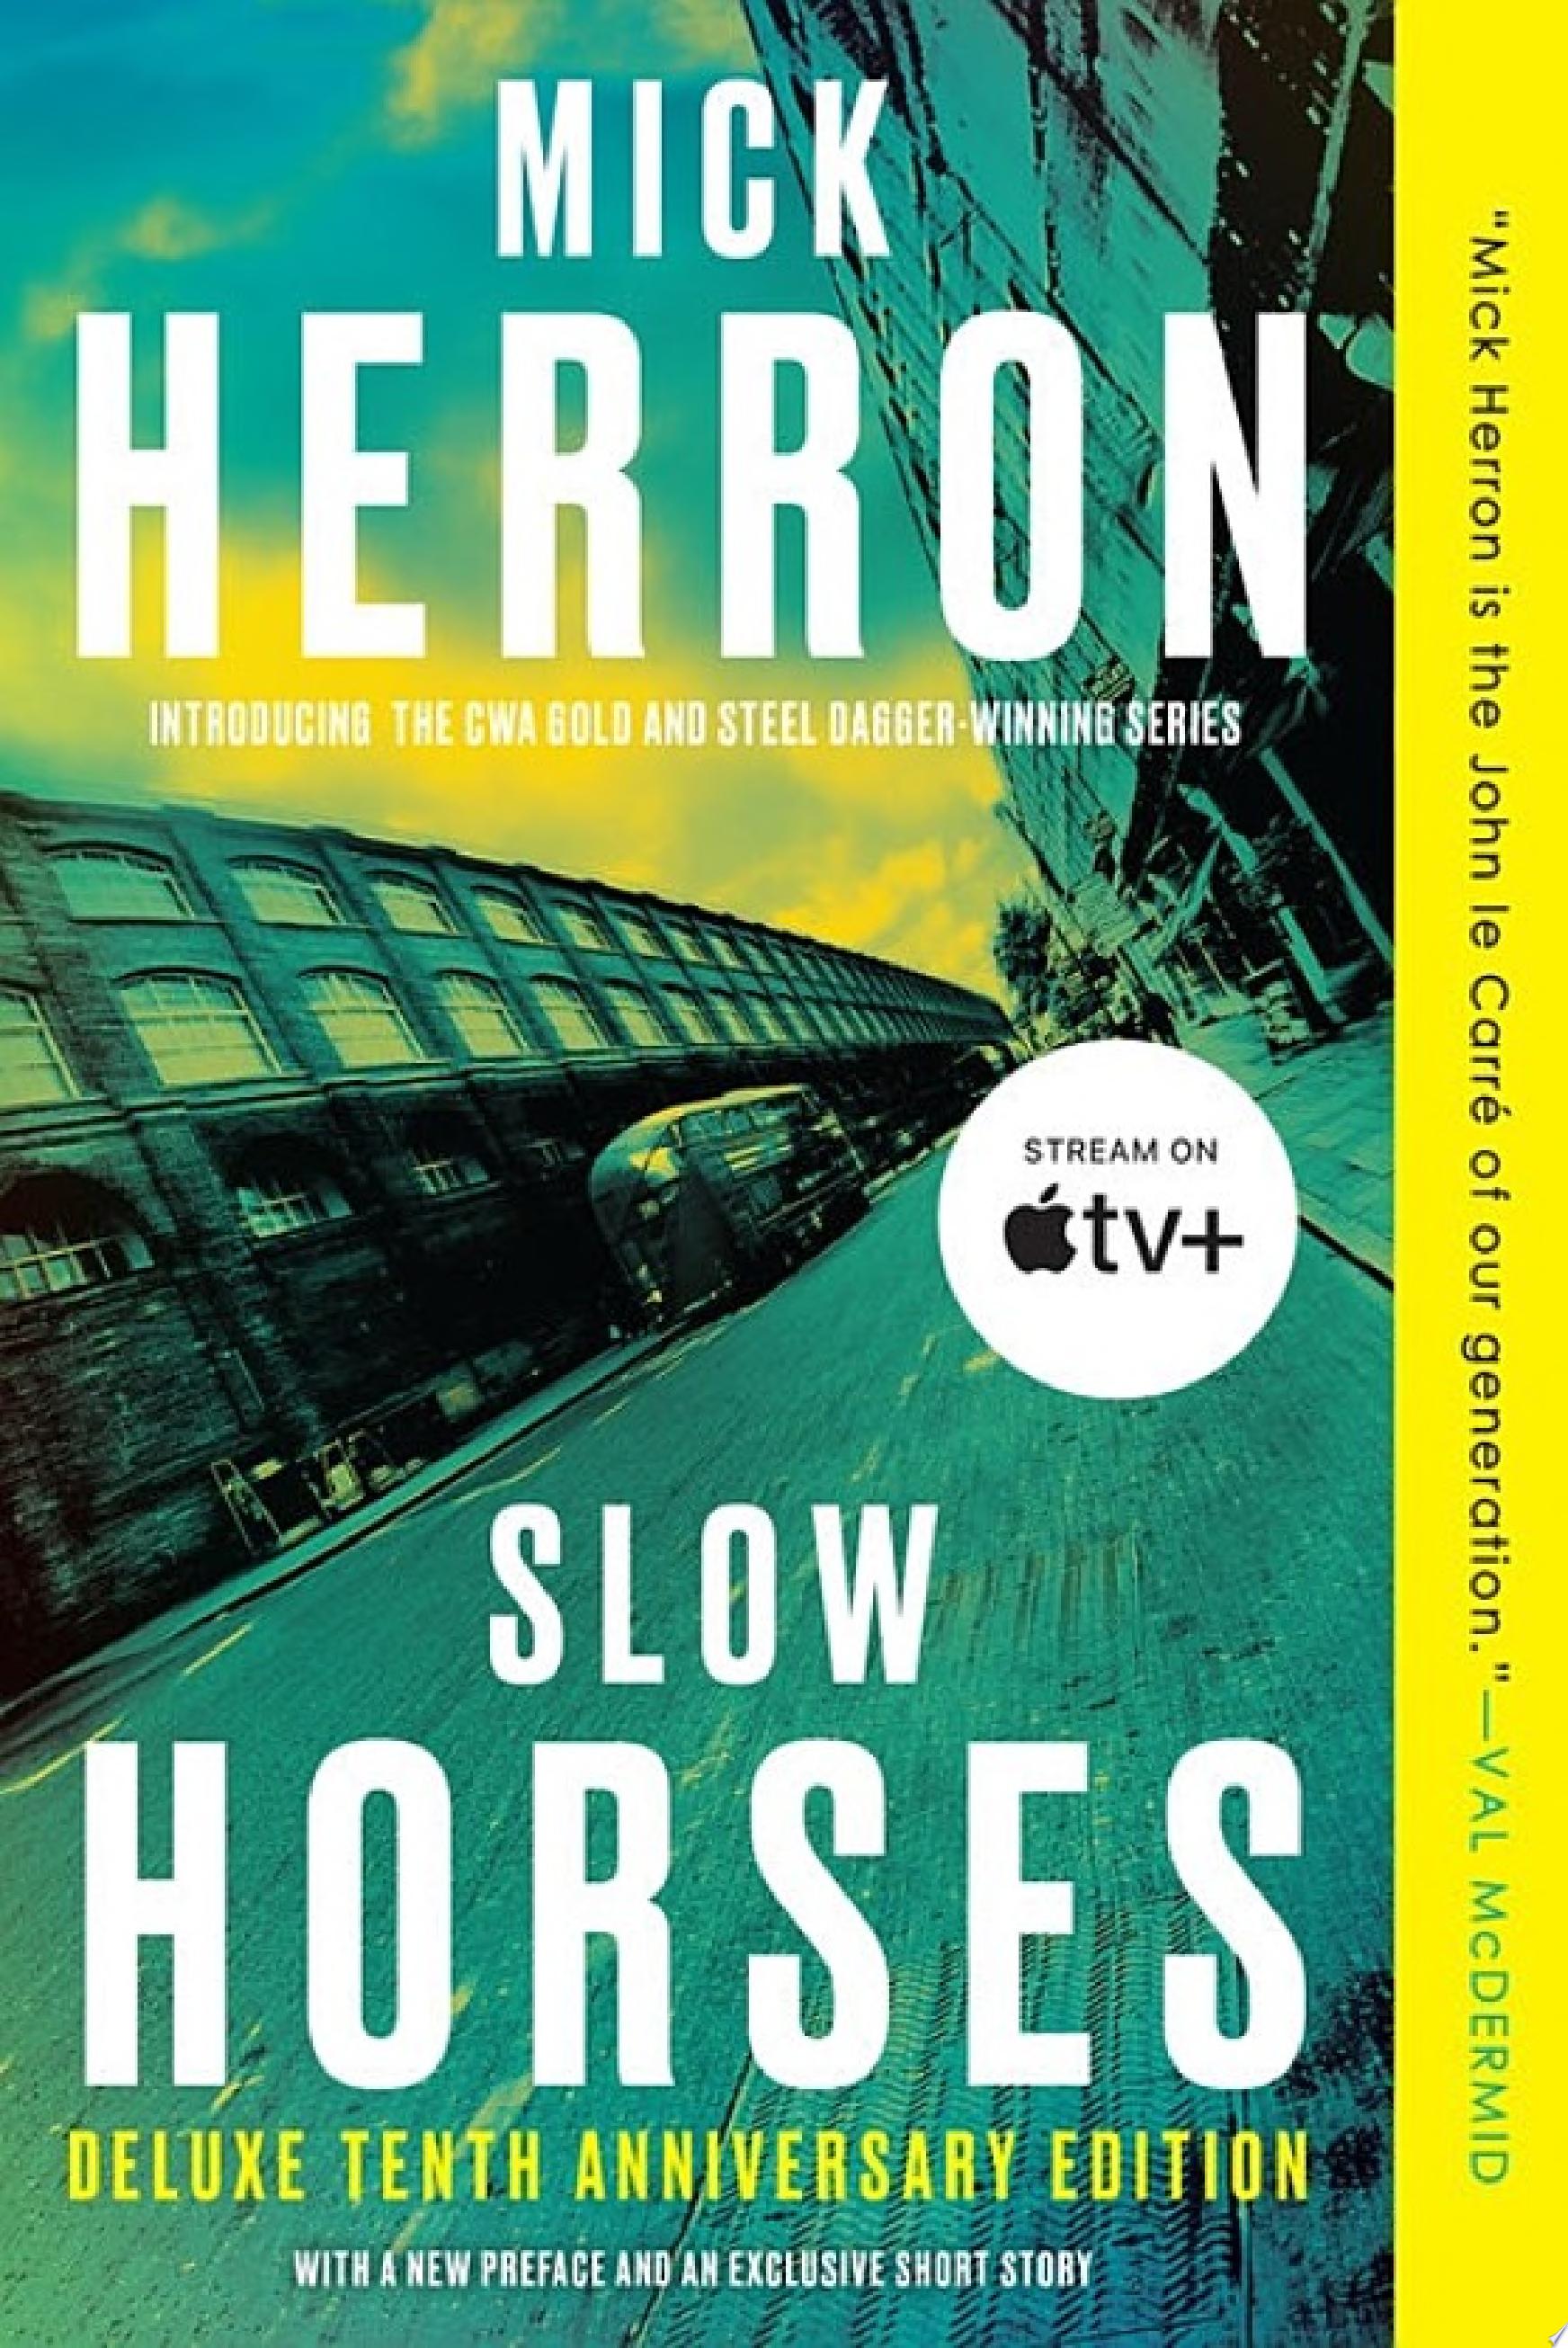 Image for "Slow Horses"